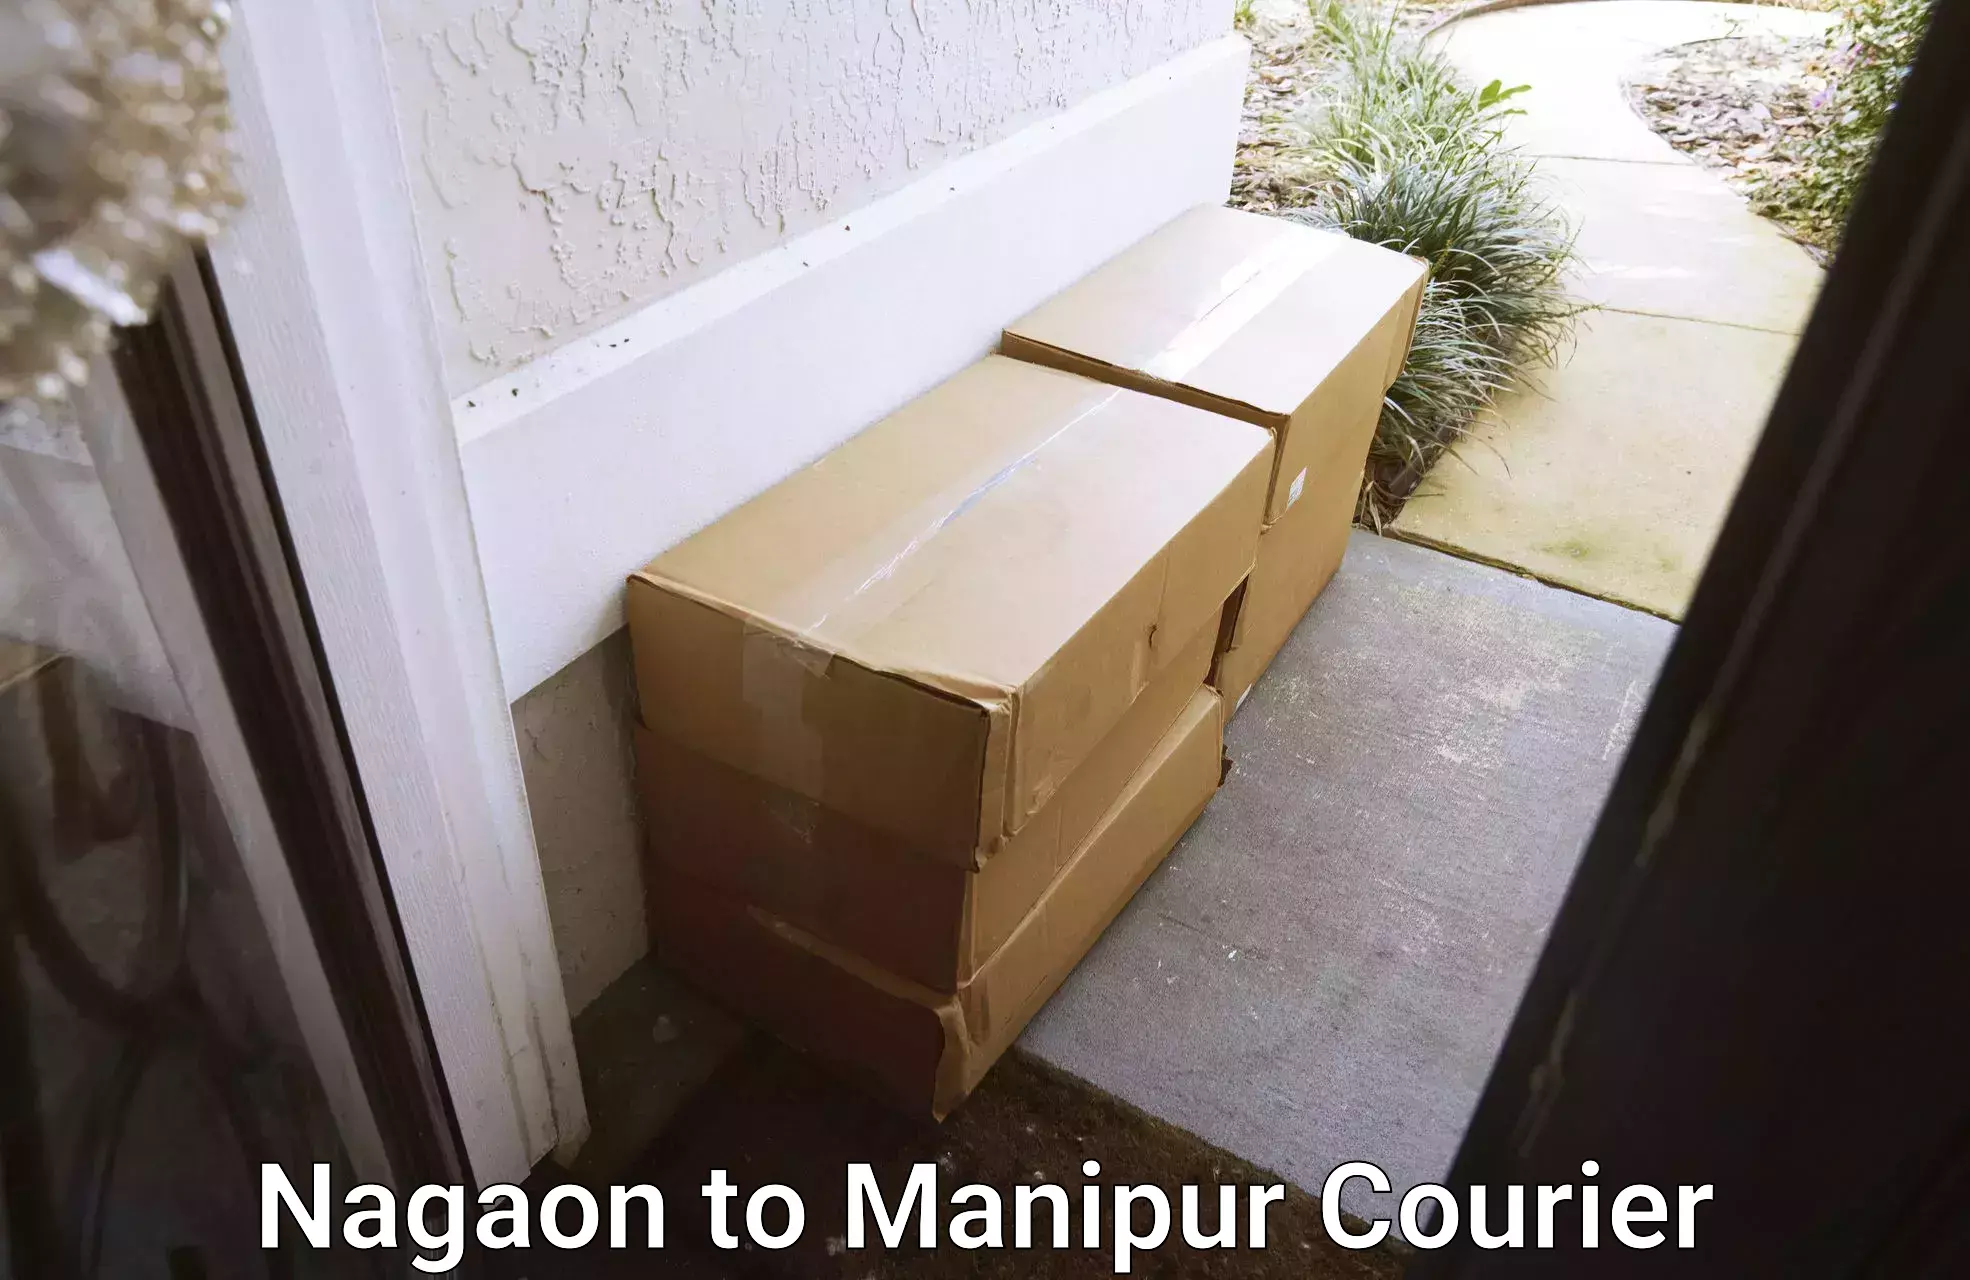 24-hour courier service in Nagaon to Manipur